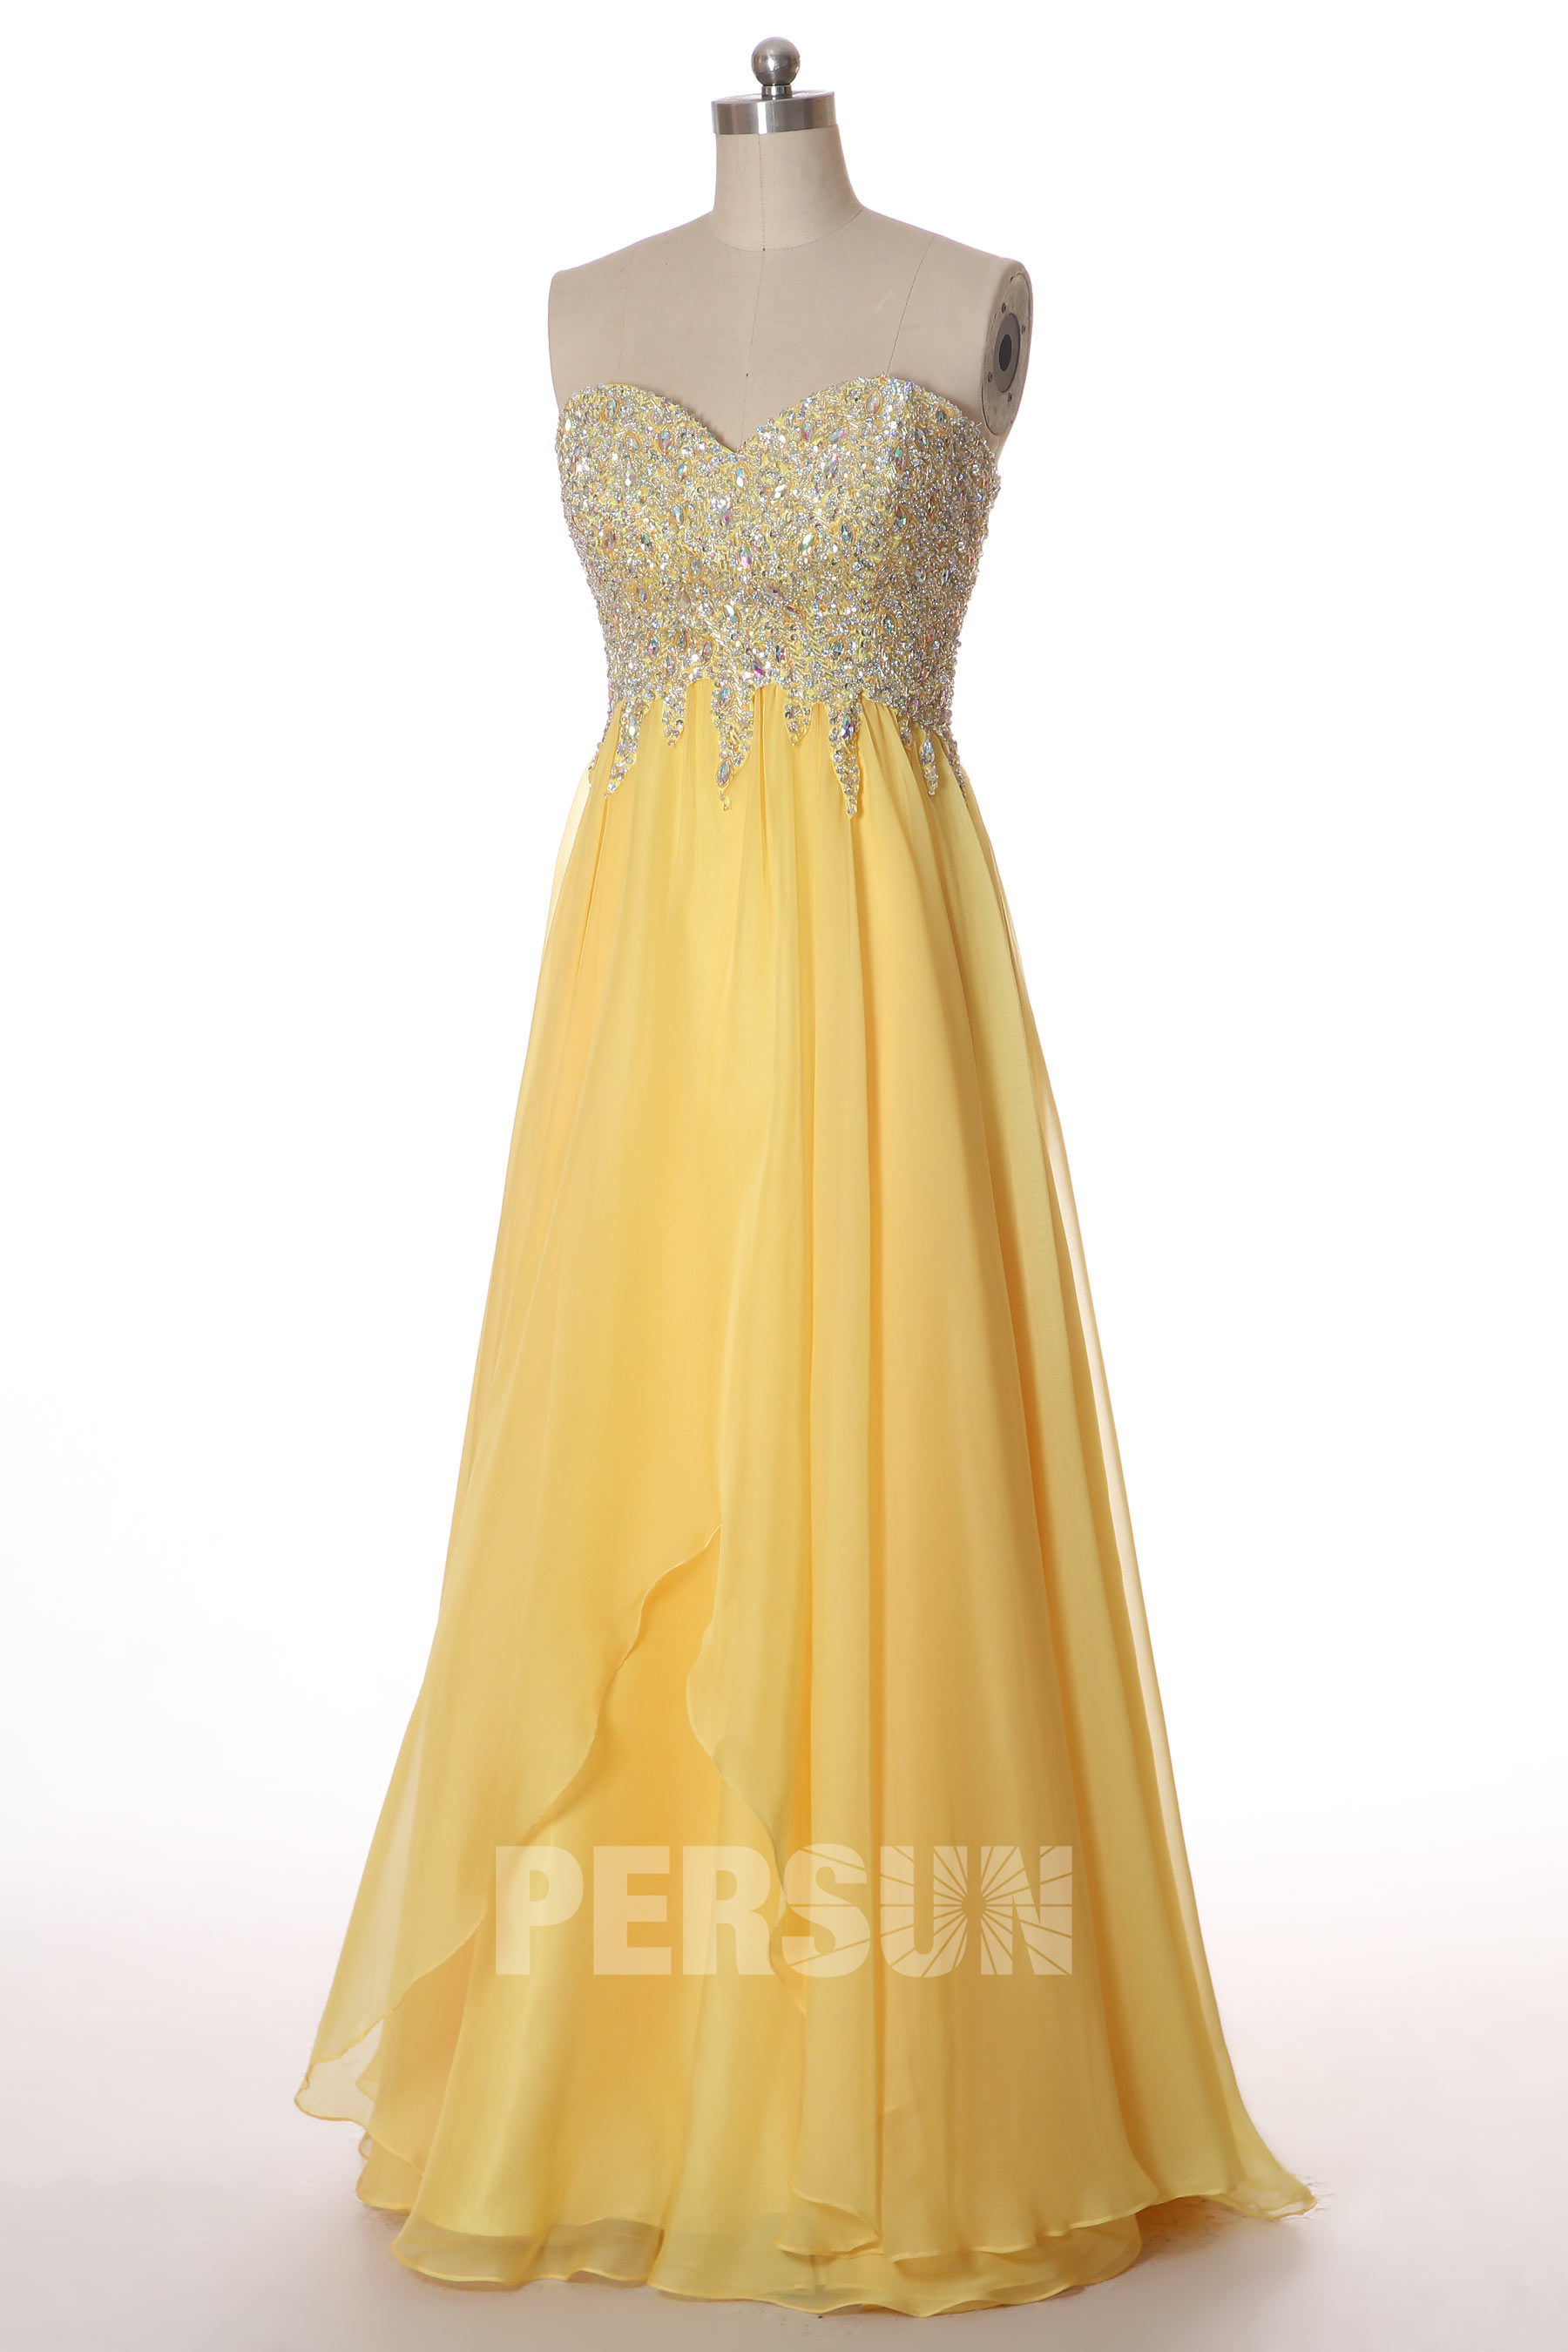 Cream Exquisite Beading Prom Dress with Dissymmetrical Skirt